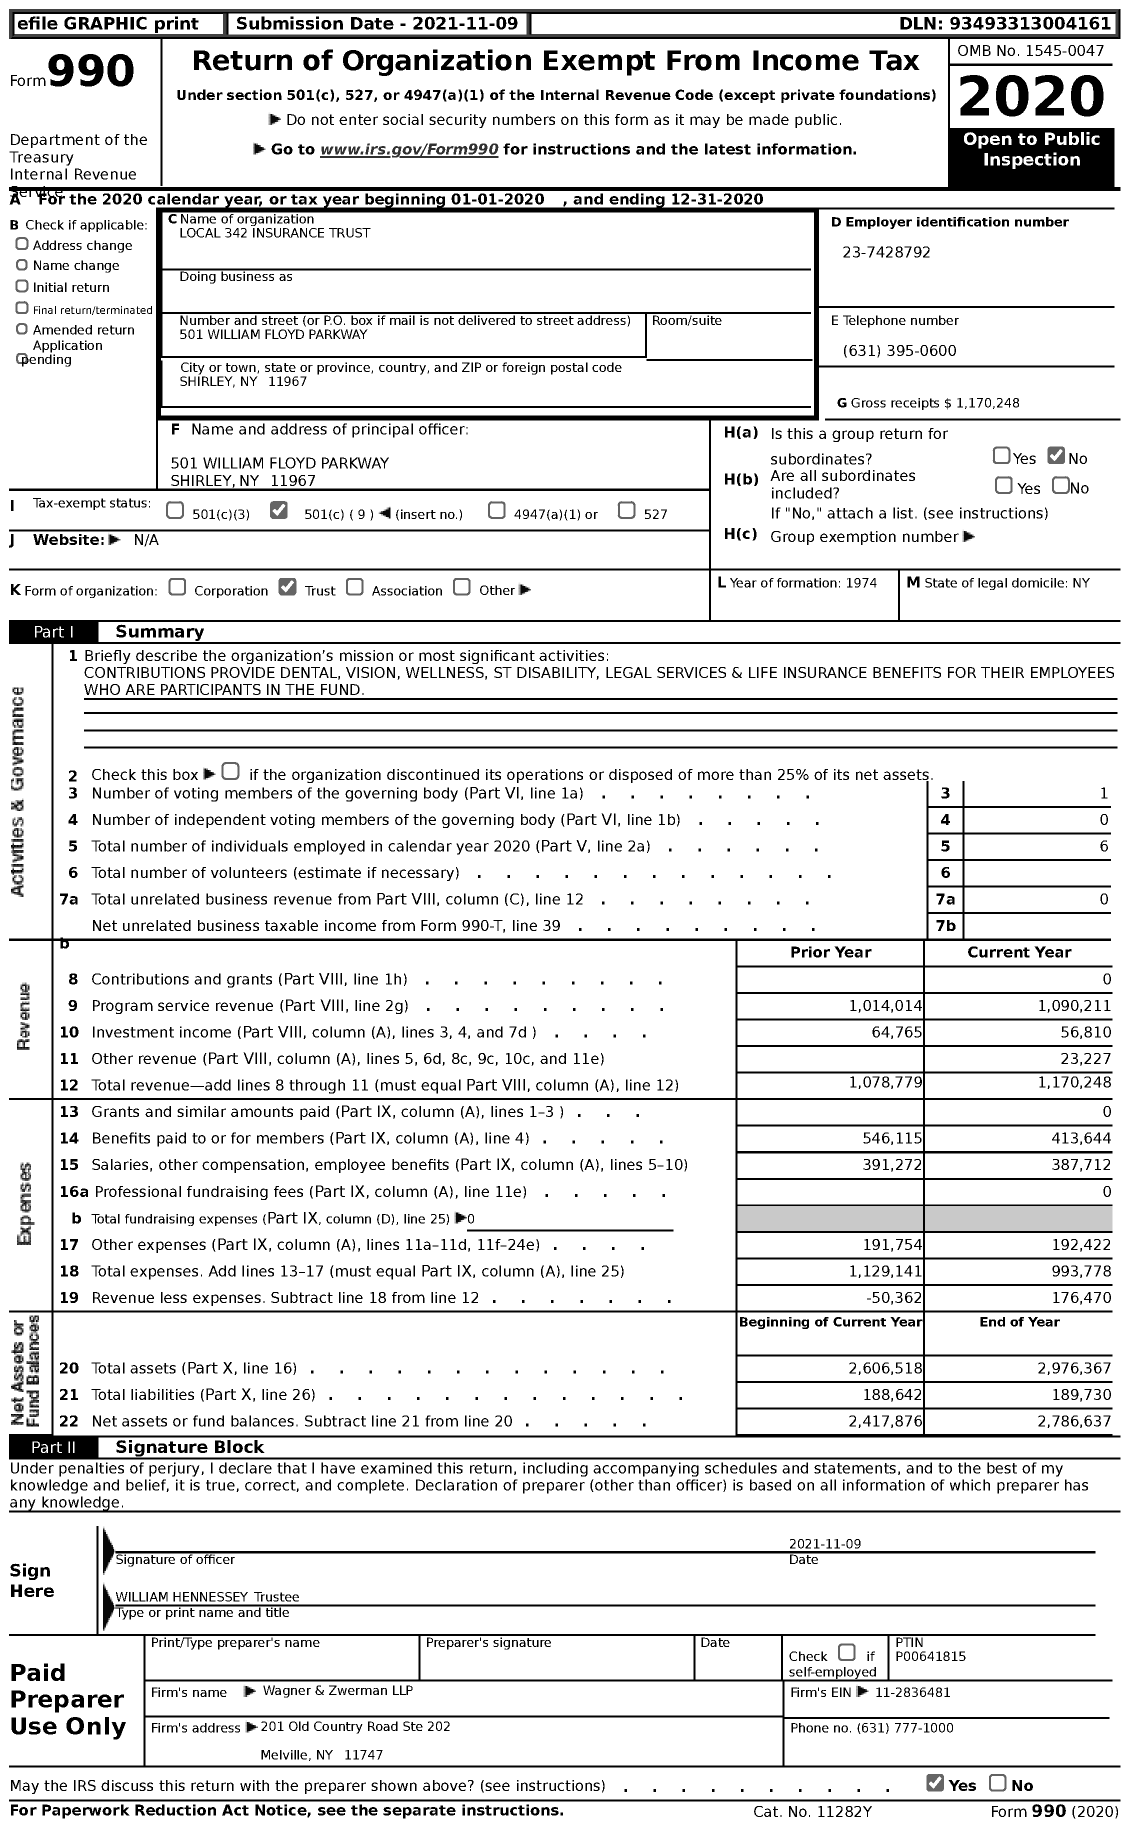 Image of first page of 2020 Form 990 for Local 342 Insurance Trust